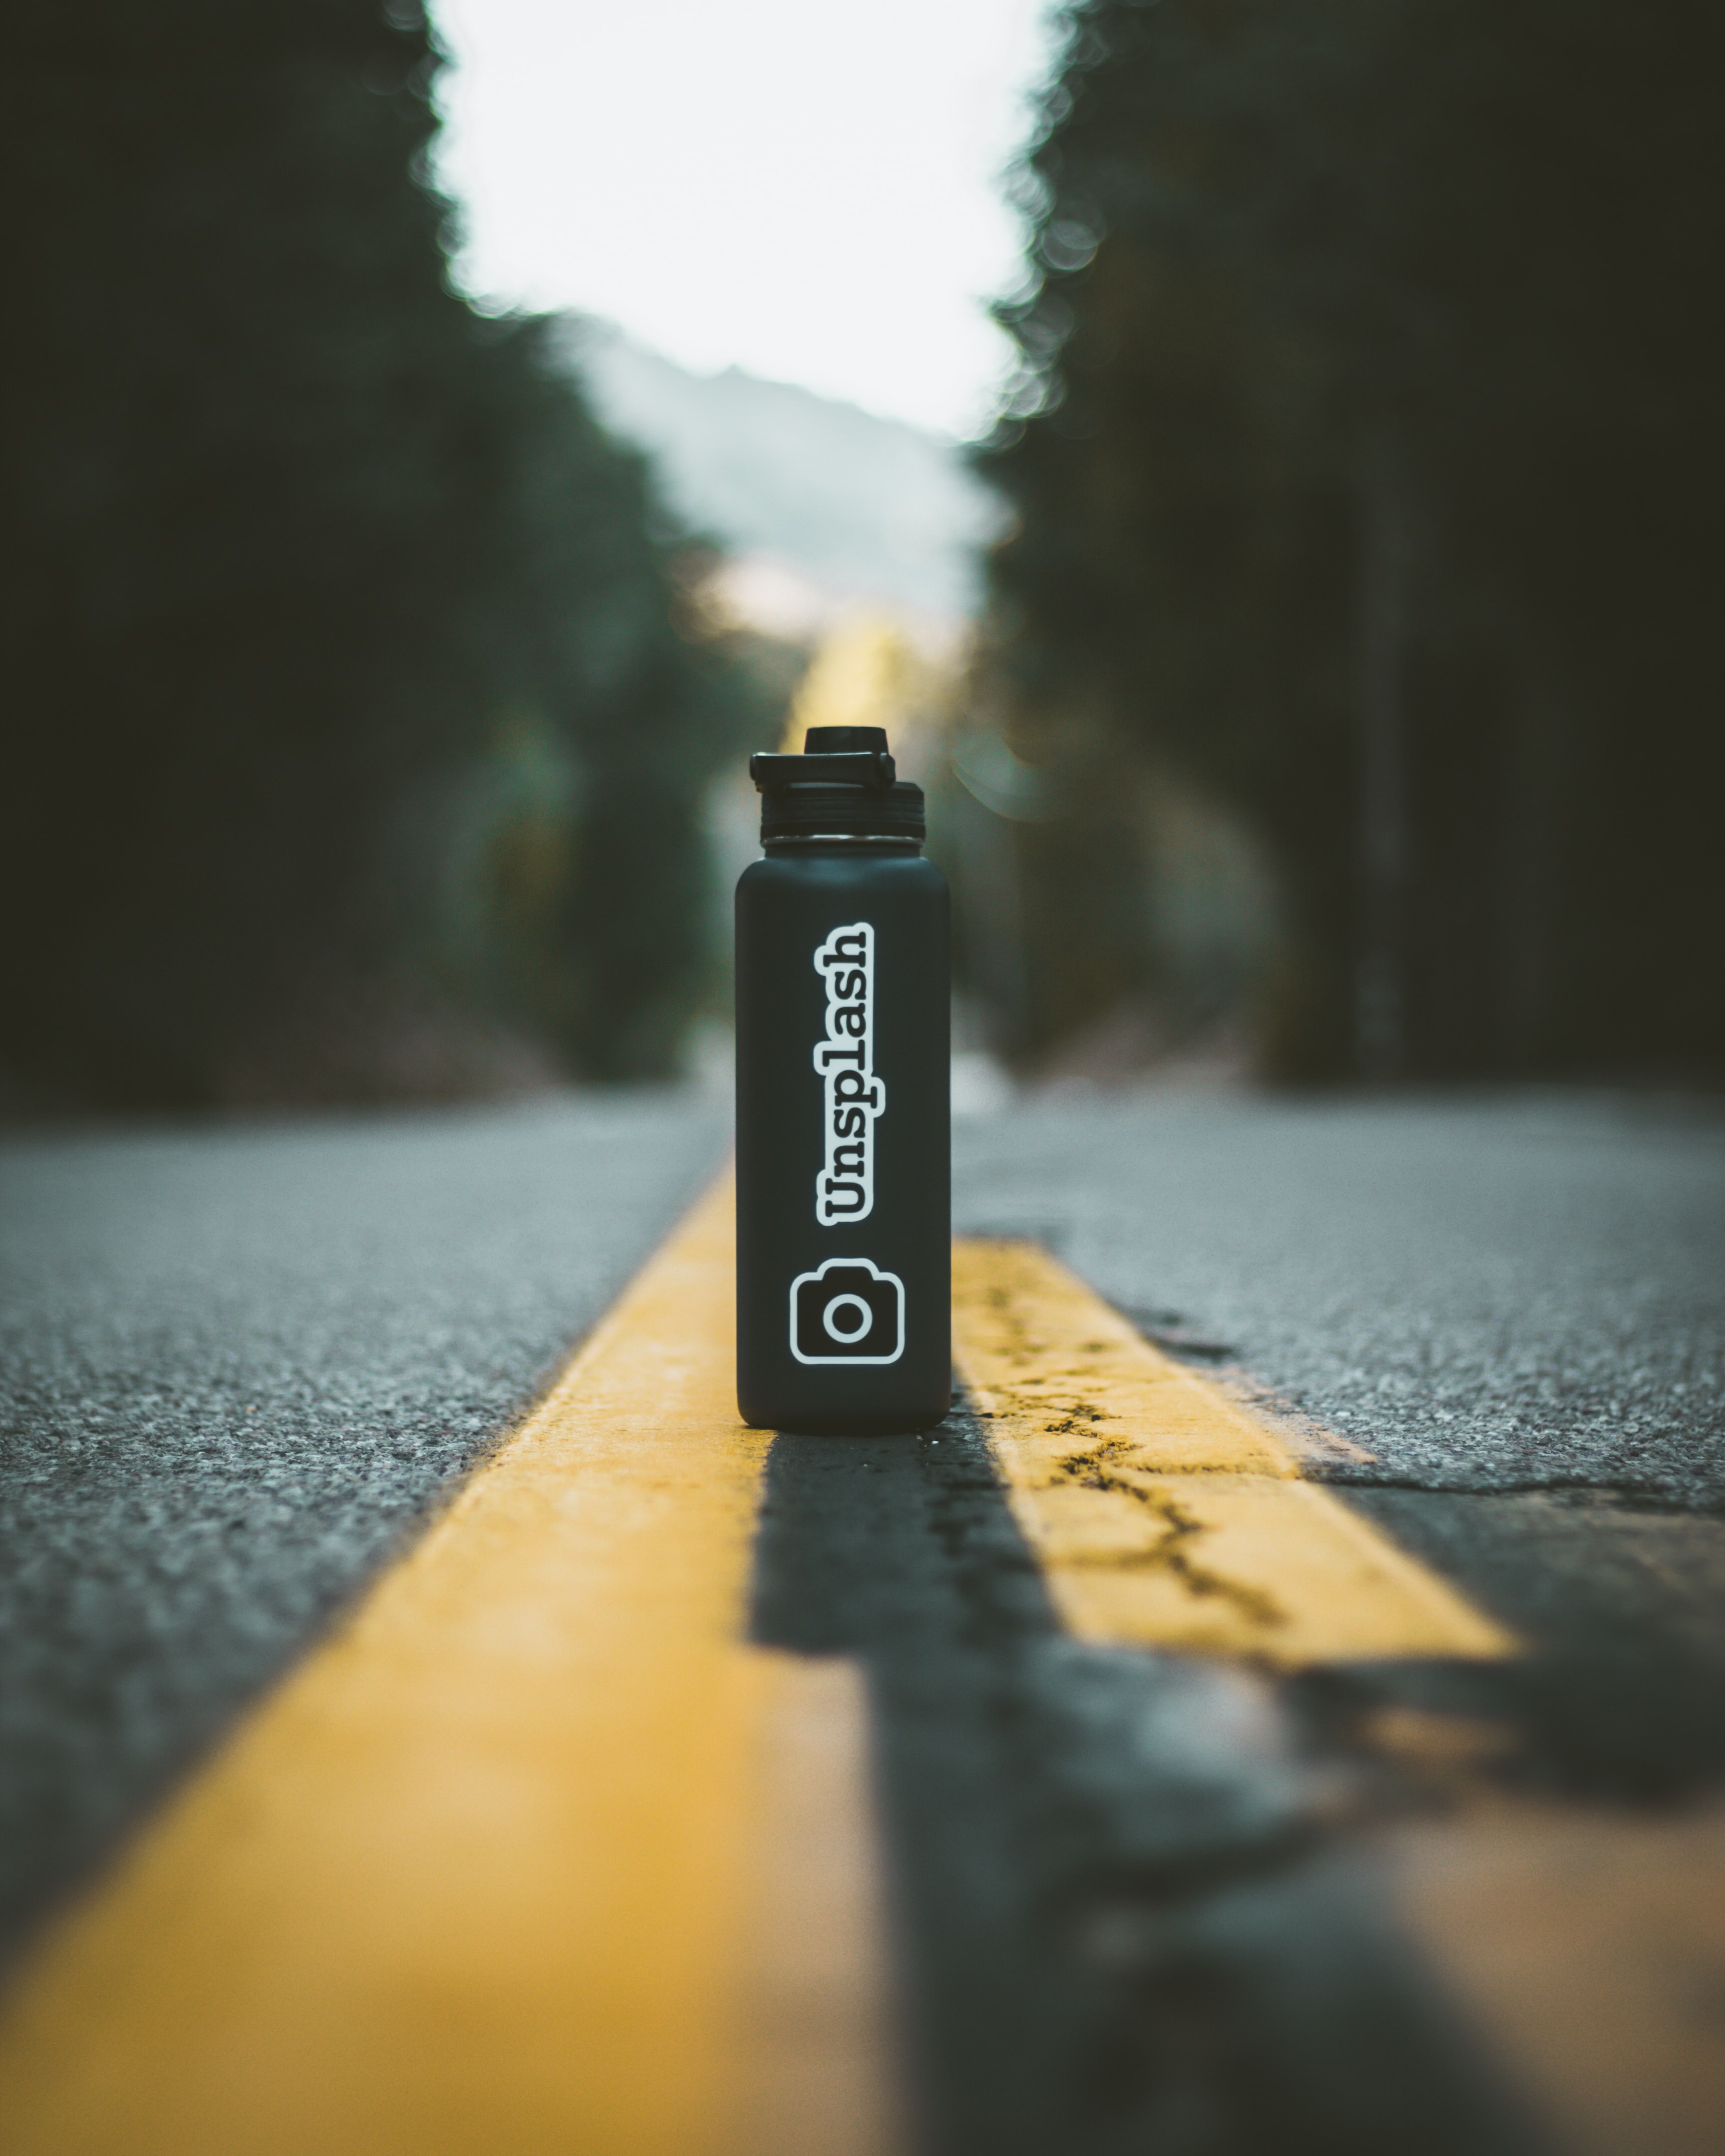 Photograph of a black metal water bottle sitting in the middle of a road. The water bottle has a sticker that says 'unsplash' above a sticker of a camera.